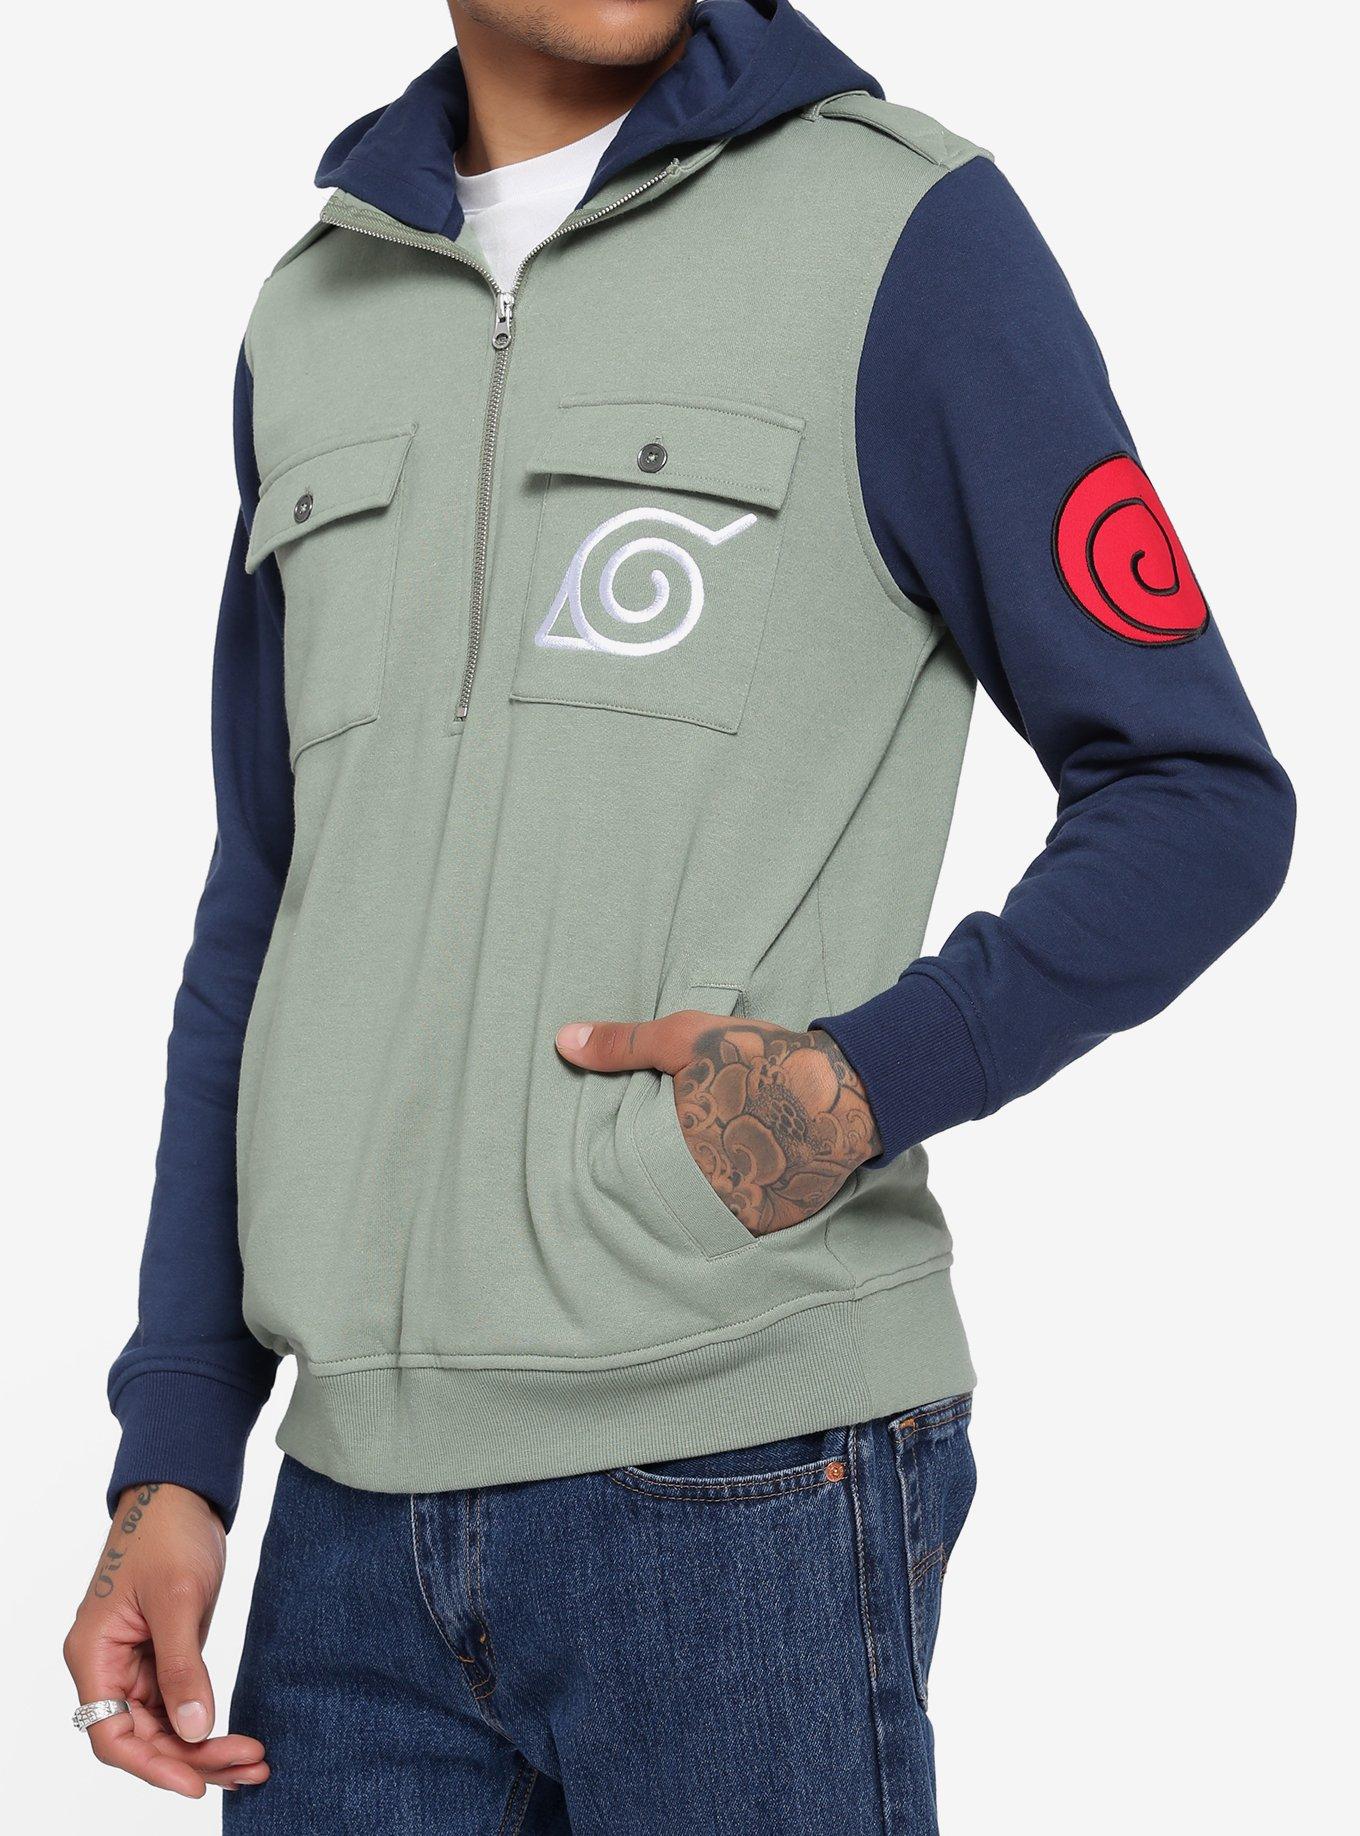 KAKASHI JUMPSUIT WITH VEST – Wicked Halloween